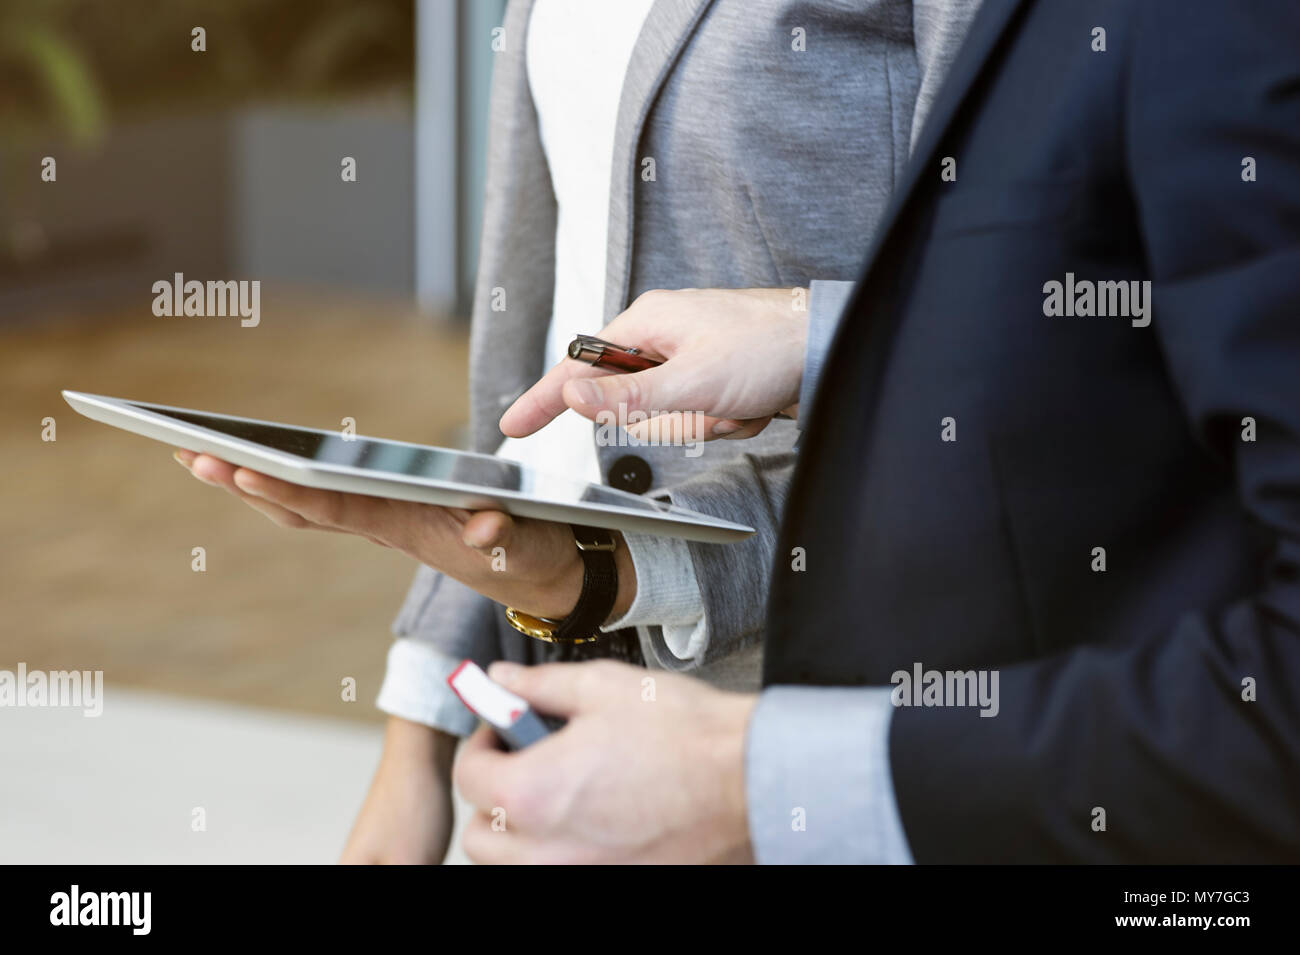 Businesswoman and man in office using digital tablet, mid section Stock Photo